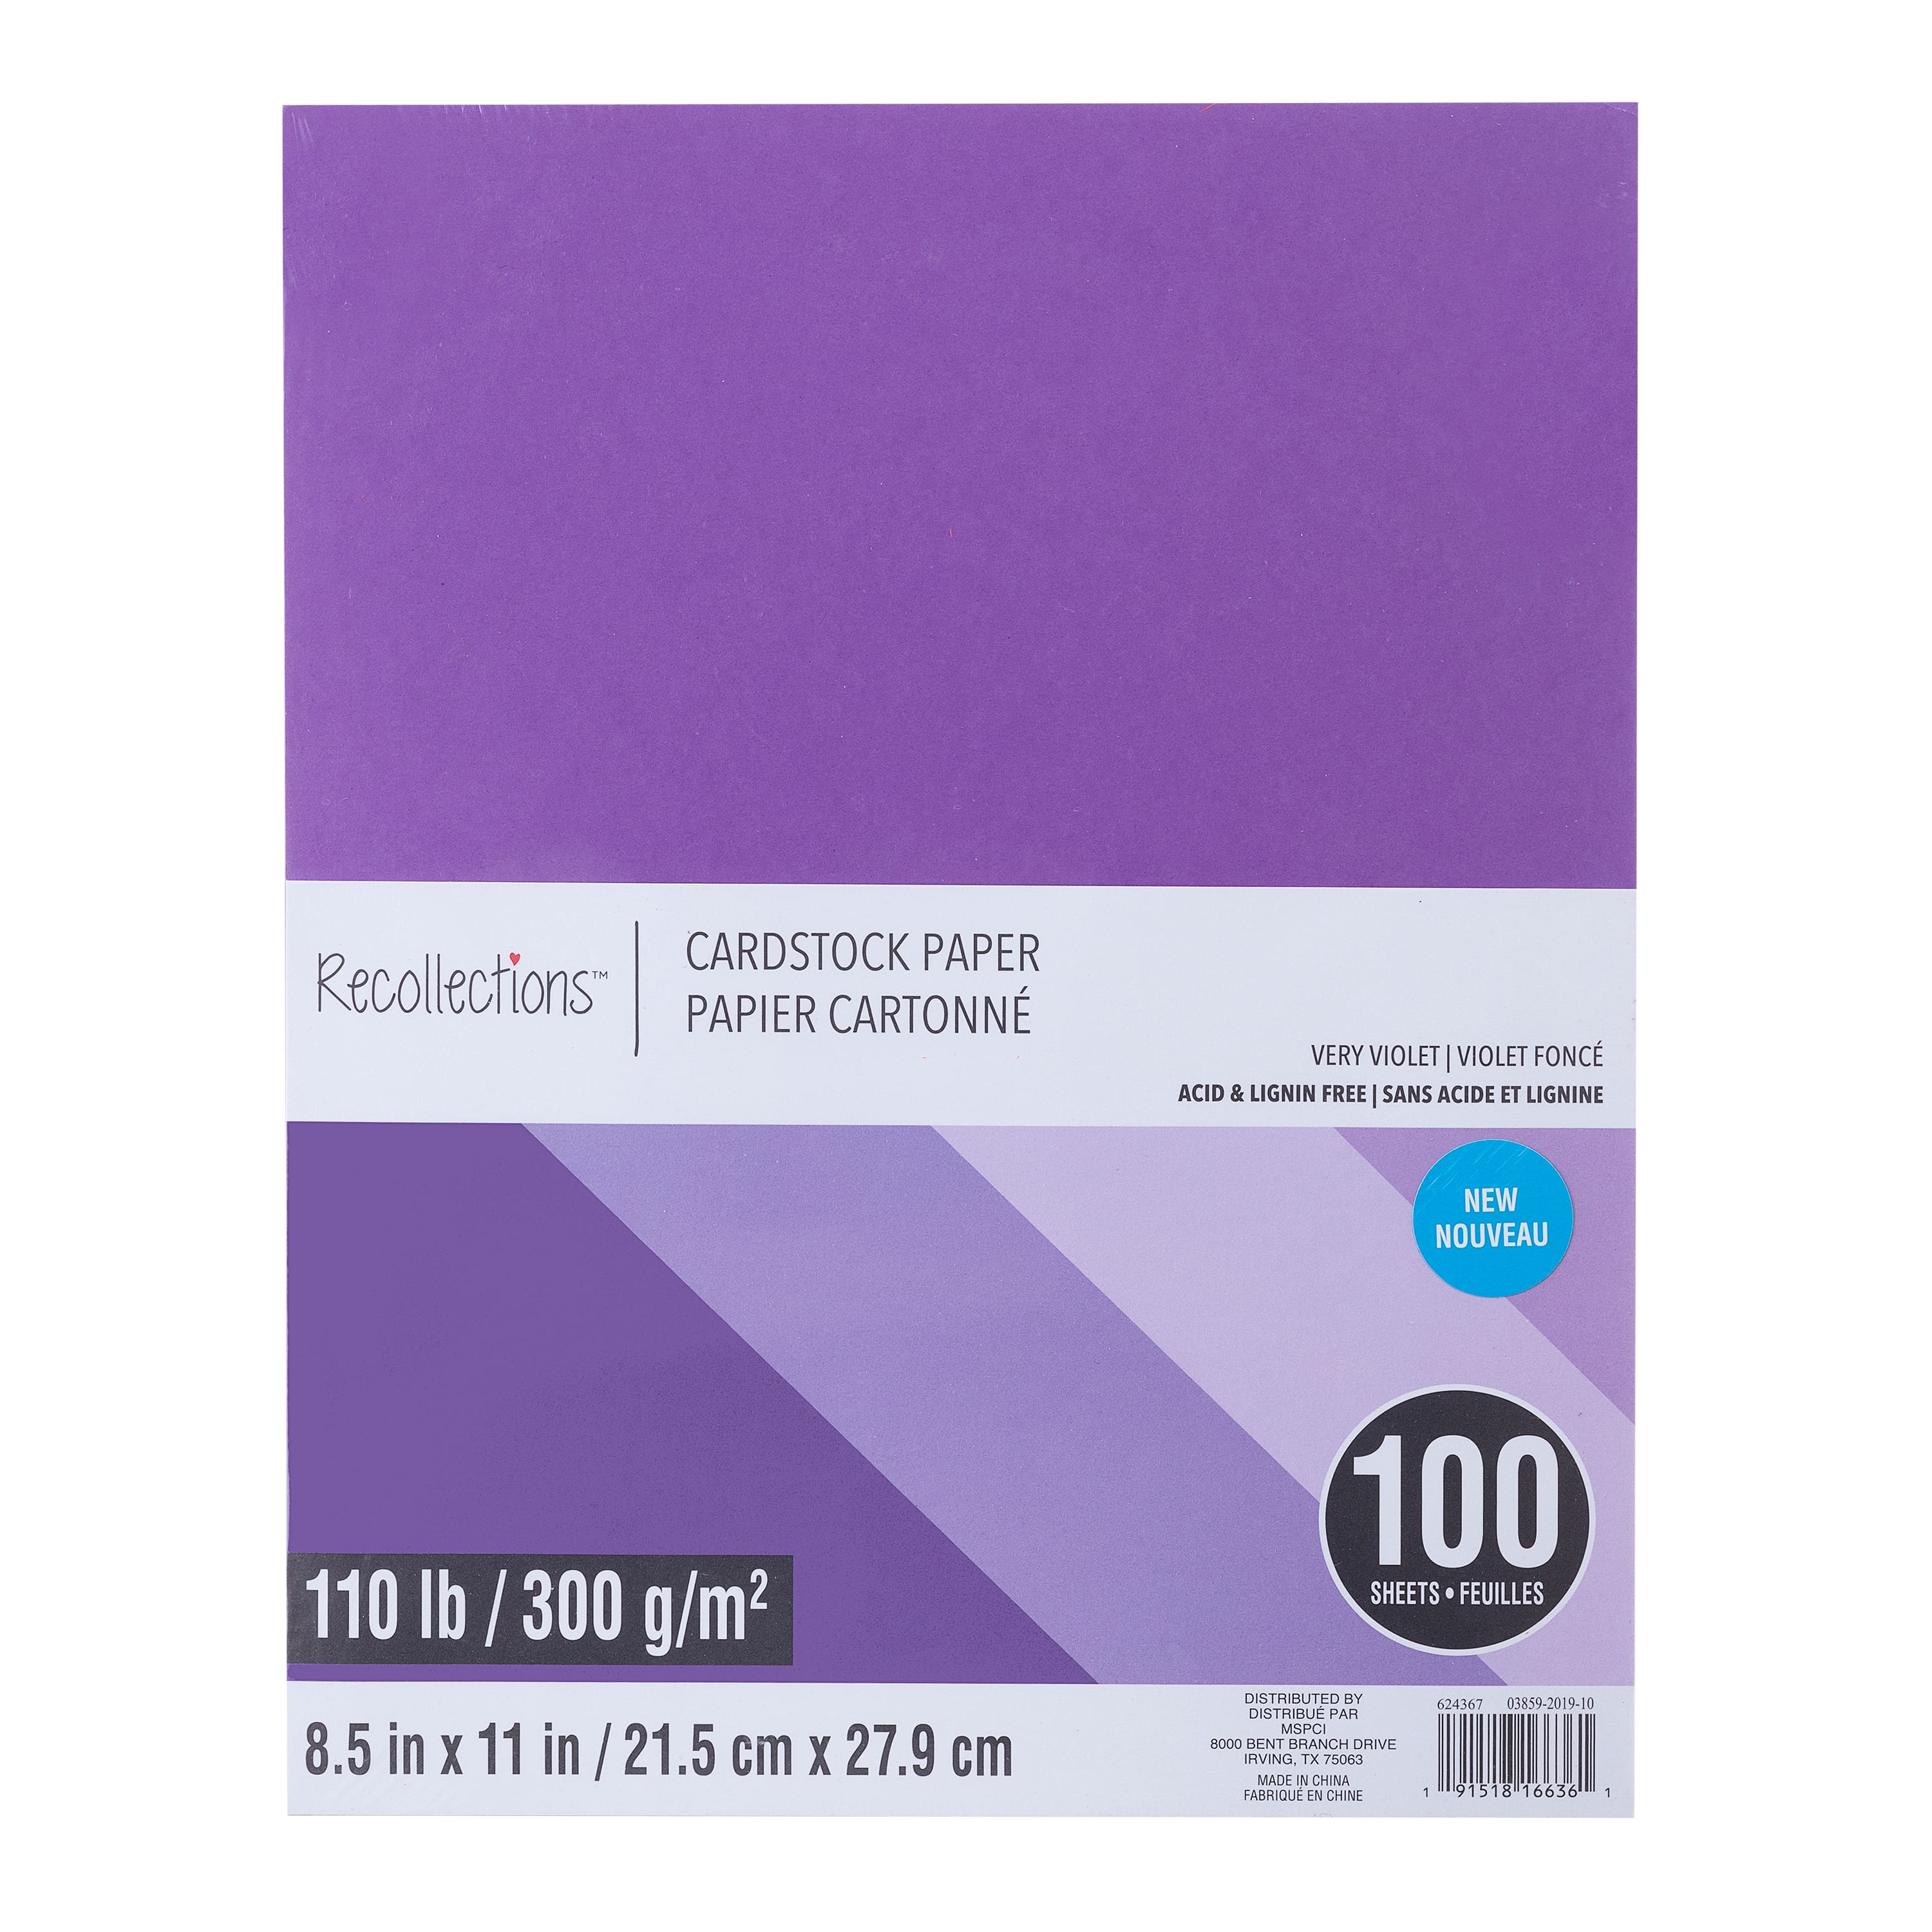 RECOLLECTIONS CARDSTOCK Paper 8 1/2 x 11 100 Sheets 110 lb